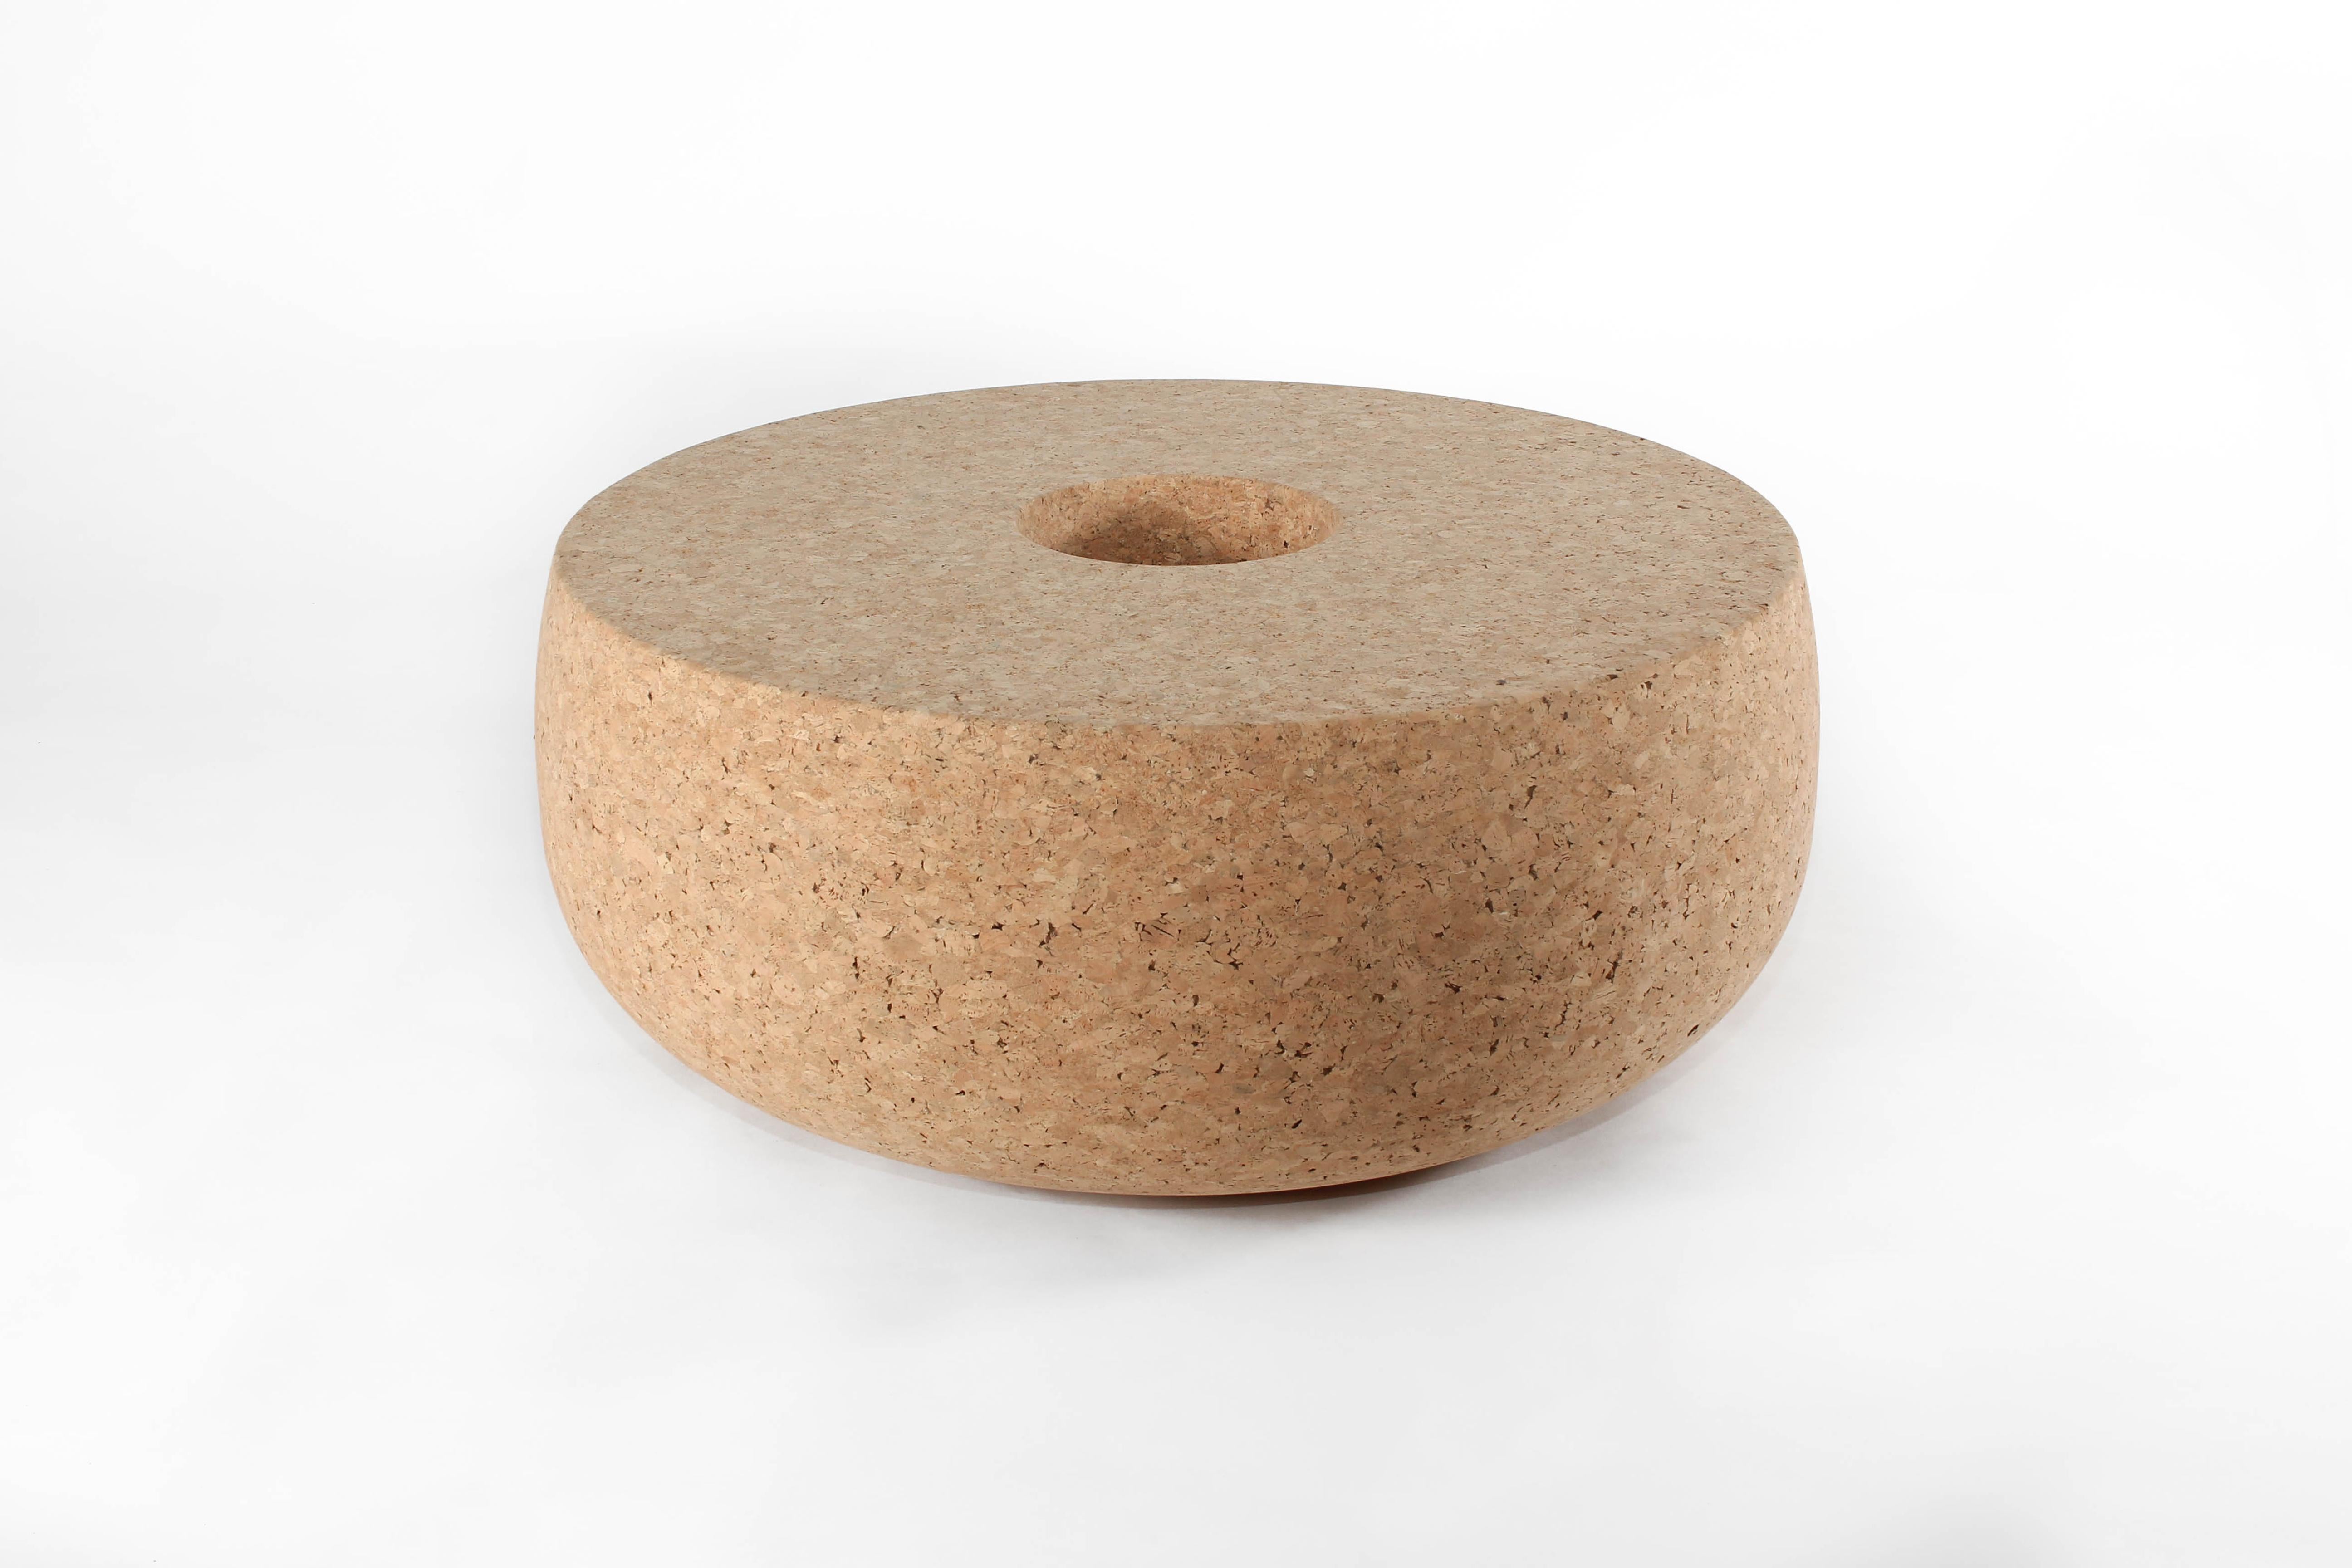 Doughnut Solid Cork Contemporary Sculptural Carved Coffee Table Bench Natural For Sale 1